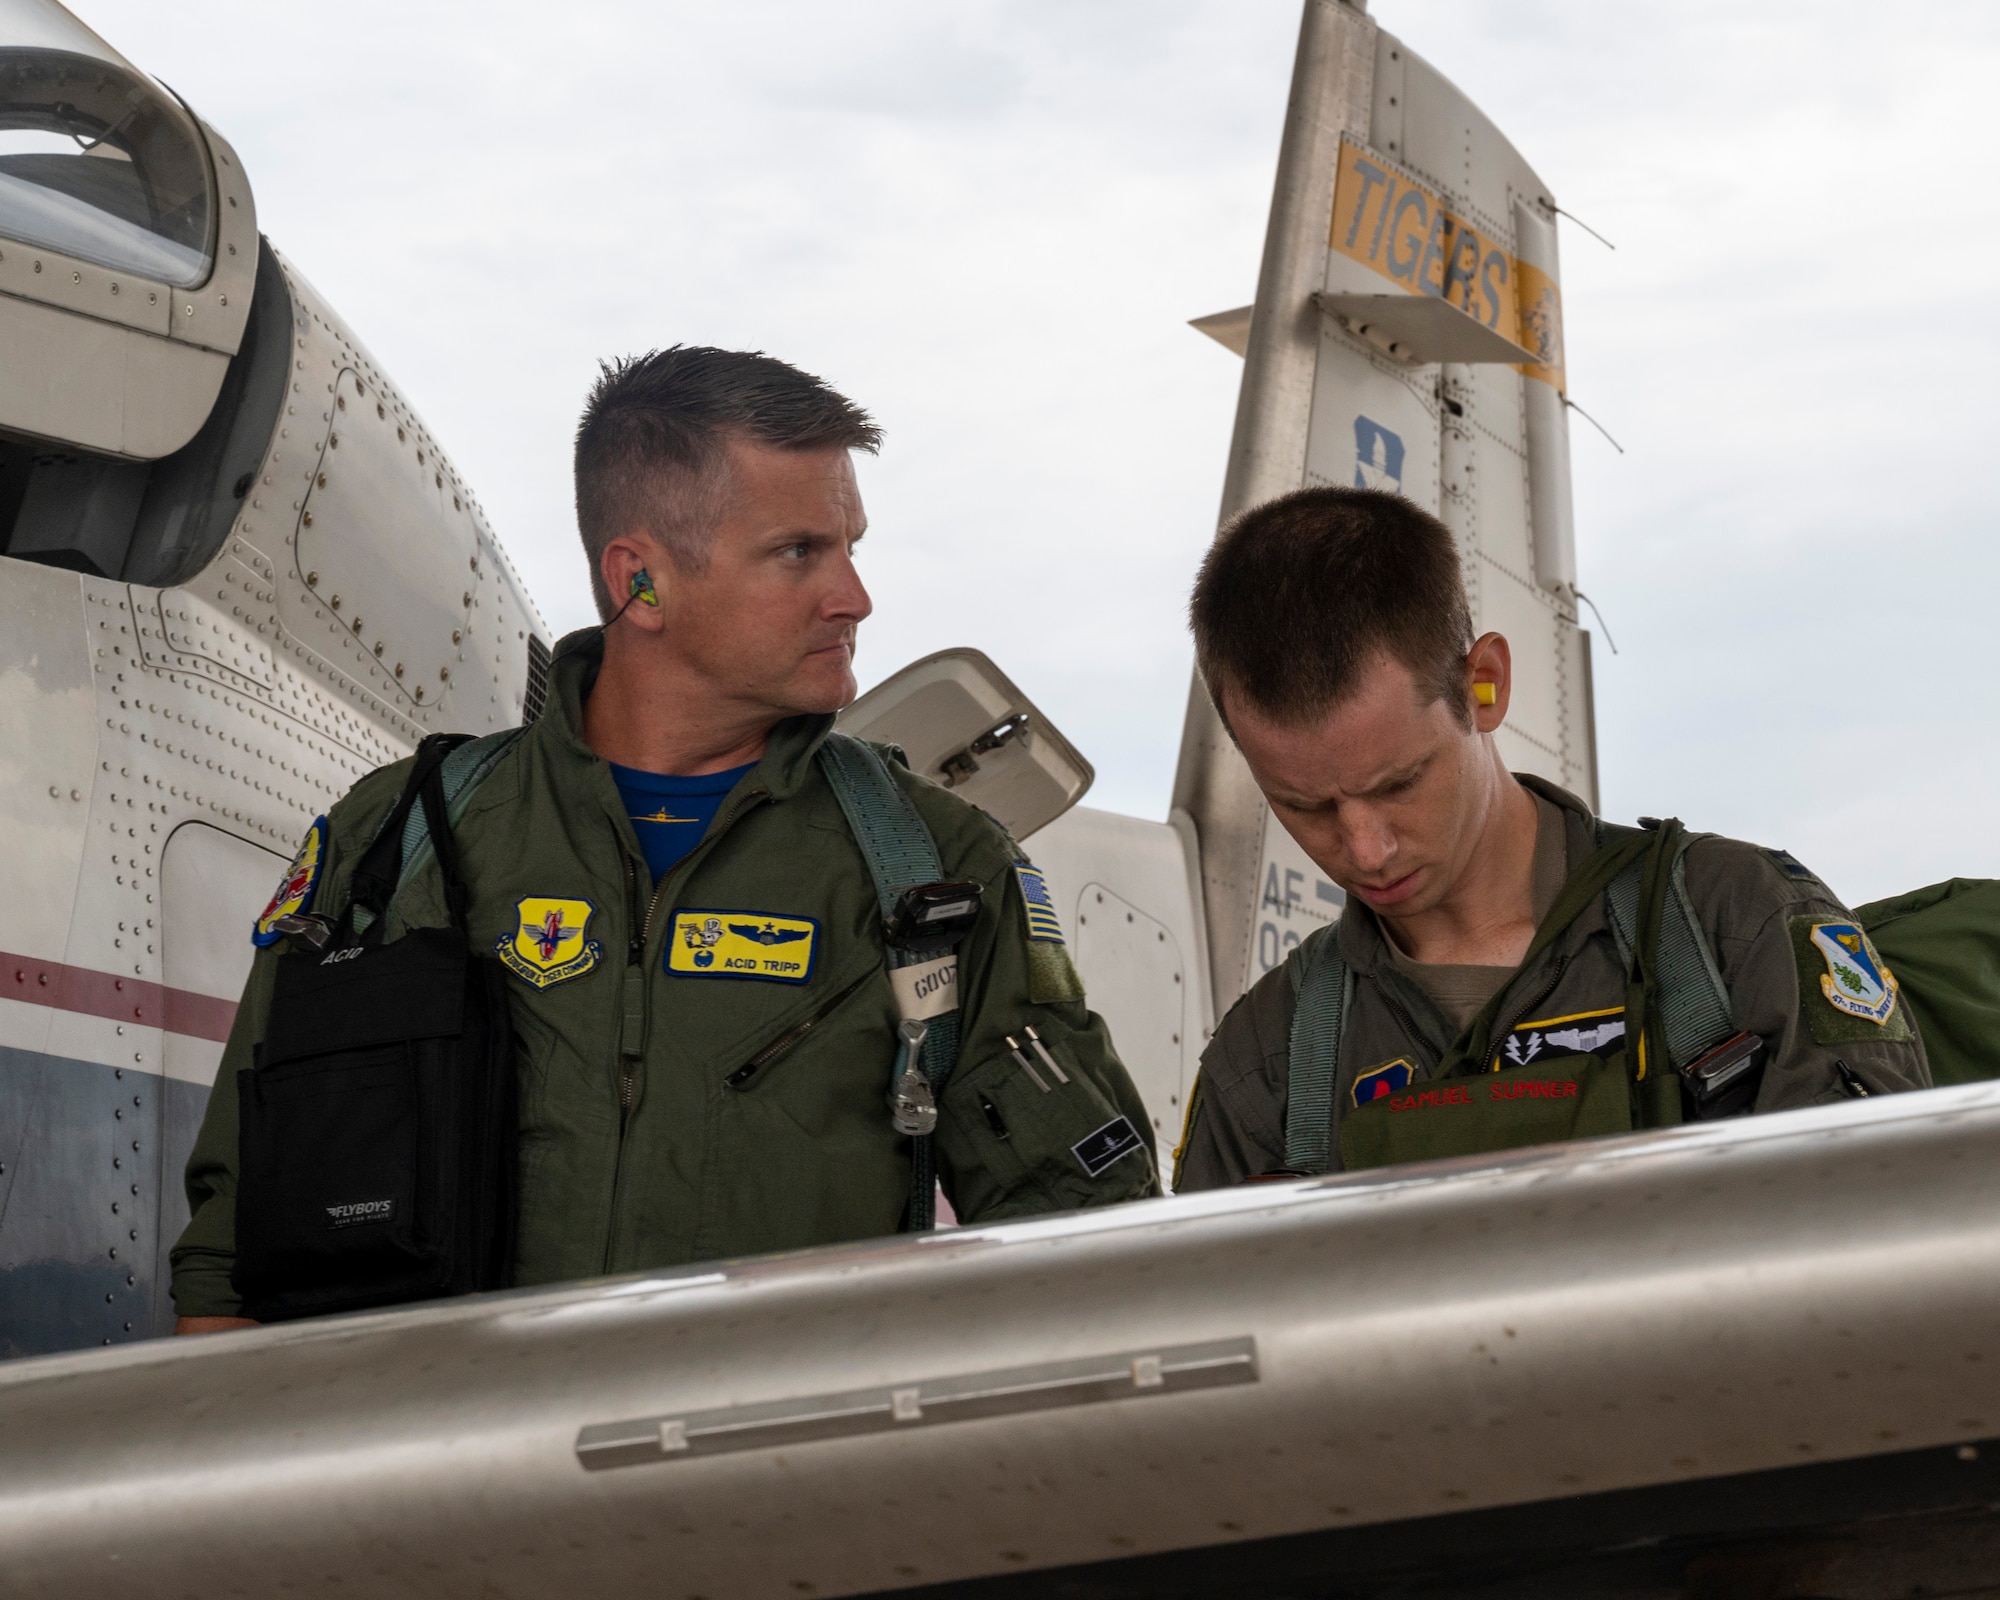 U.S. Air Force Lt. Col. Brian “Tiger King” Tripp, 85th Flying Training Squadron commander, goes over a pre flight checklist with Capt. Samuel Sumner, 85th Flying Training Squadron instructor pilot, before flying on Tiger Day at Laughlin Air Force Base, Texas on August 5, 2021. Pilots on Tiger Day took to the sky to celebrate their heritage for being a part of the 85th Flying Training Squadron in a competition against fellow instructor pilots. (U.S. Air Force Photo by Senior Airman Nicholas Larsen)